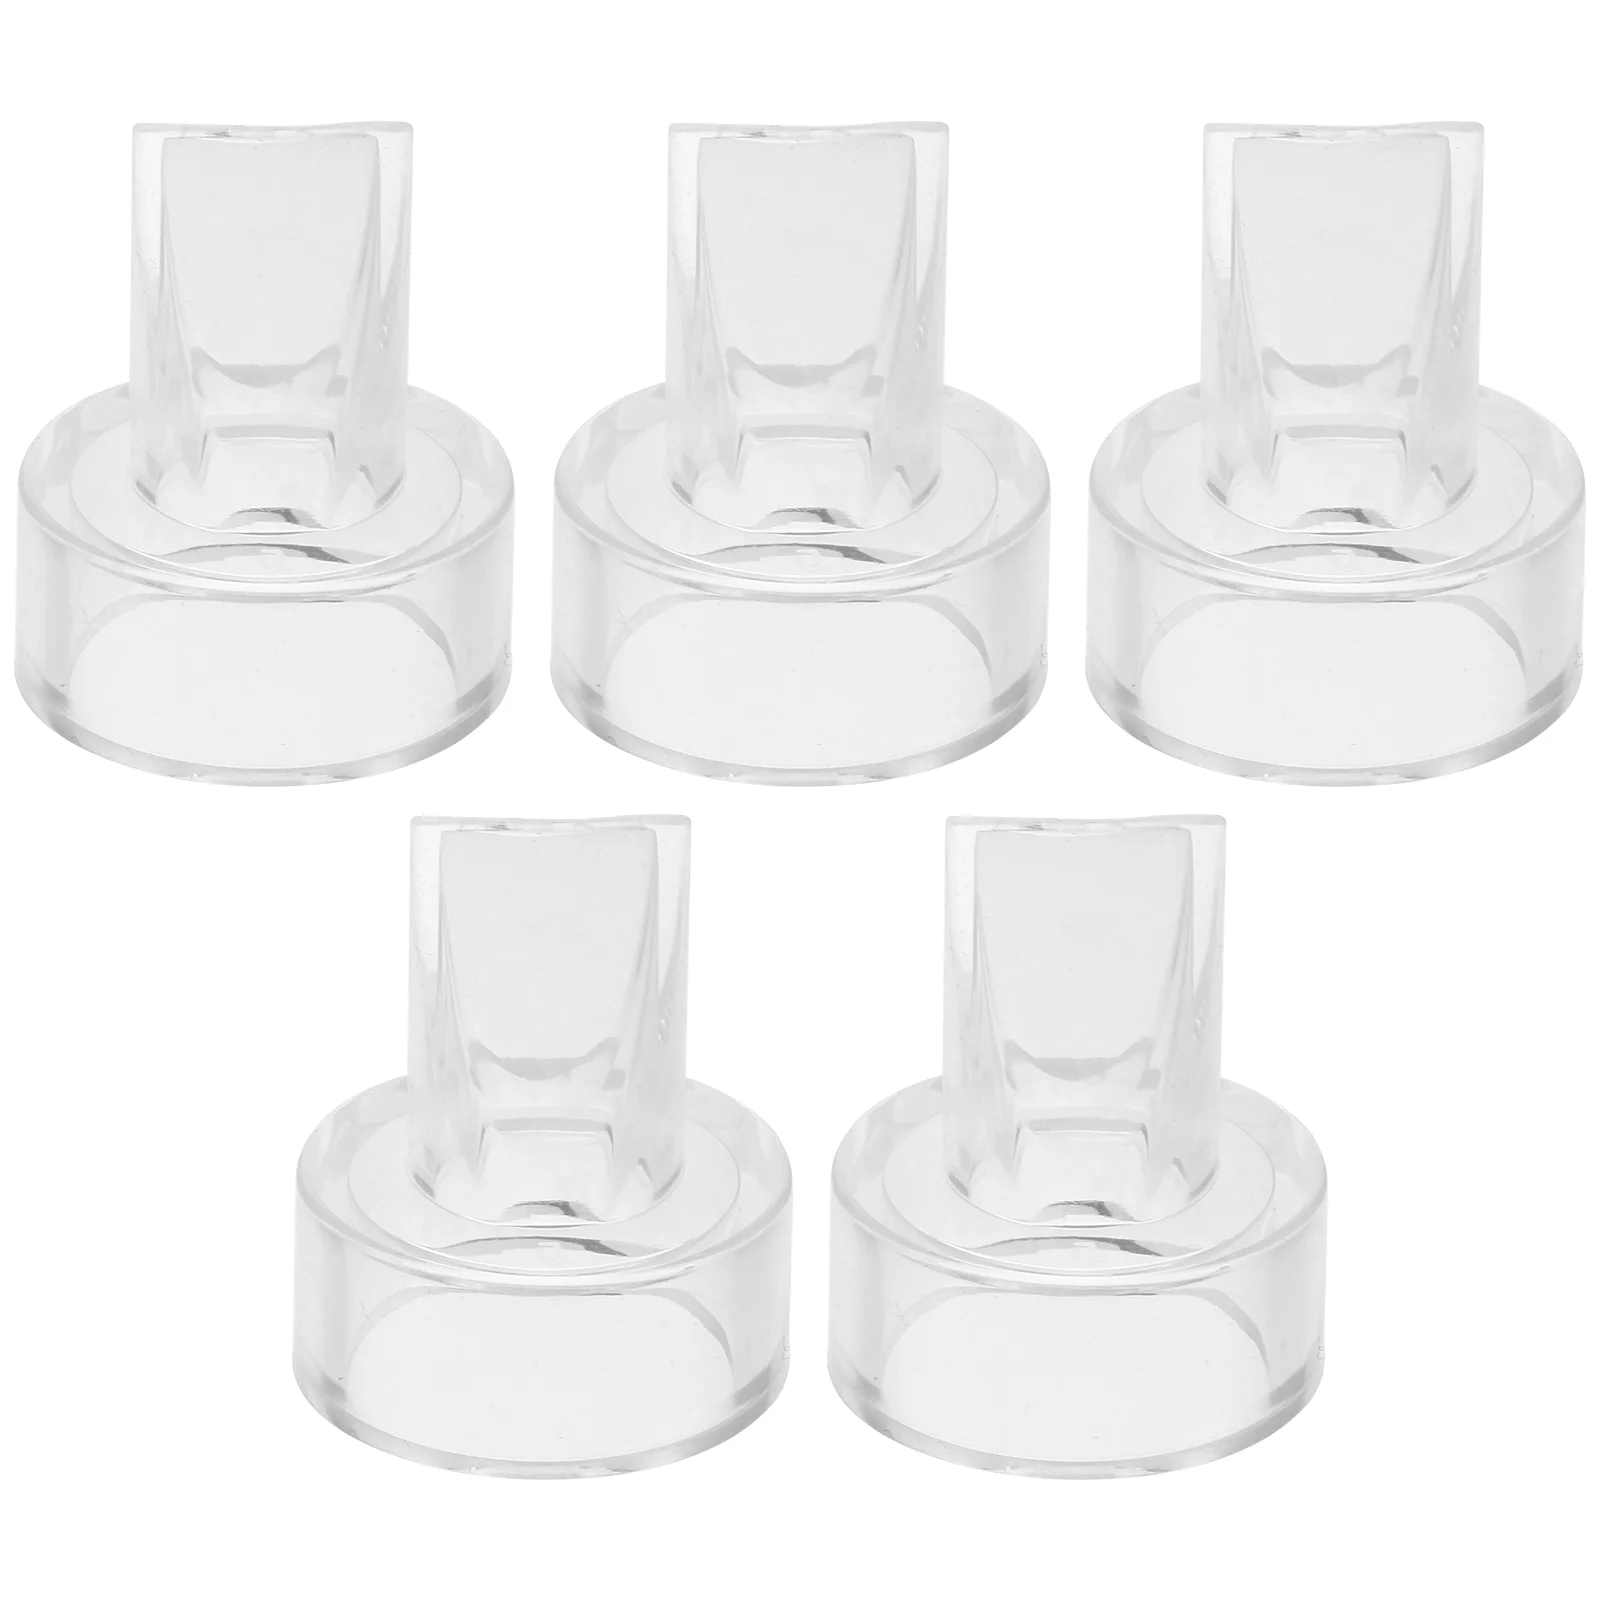 цена 5pcs Valves Silicone Replacement Valves Electric Pump Accessories Backflow Protector ( 19mm )